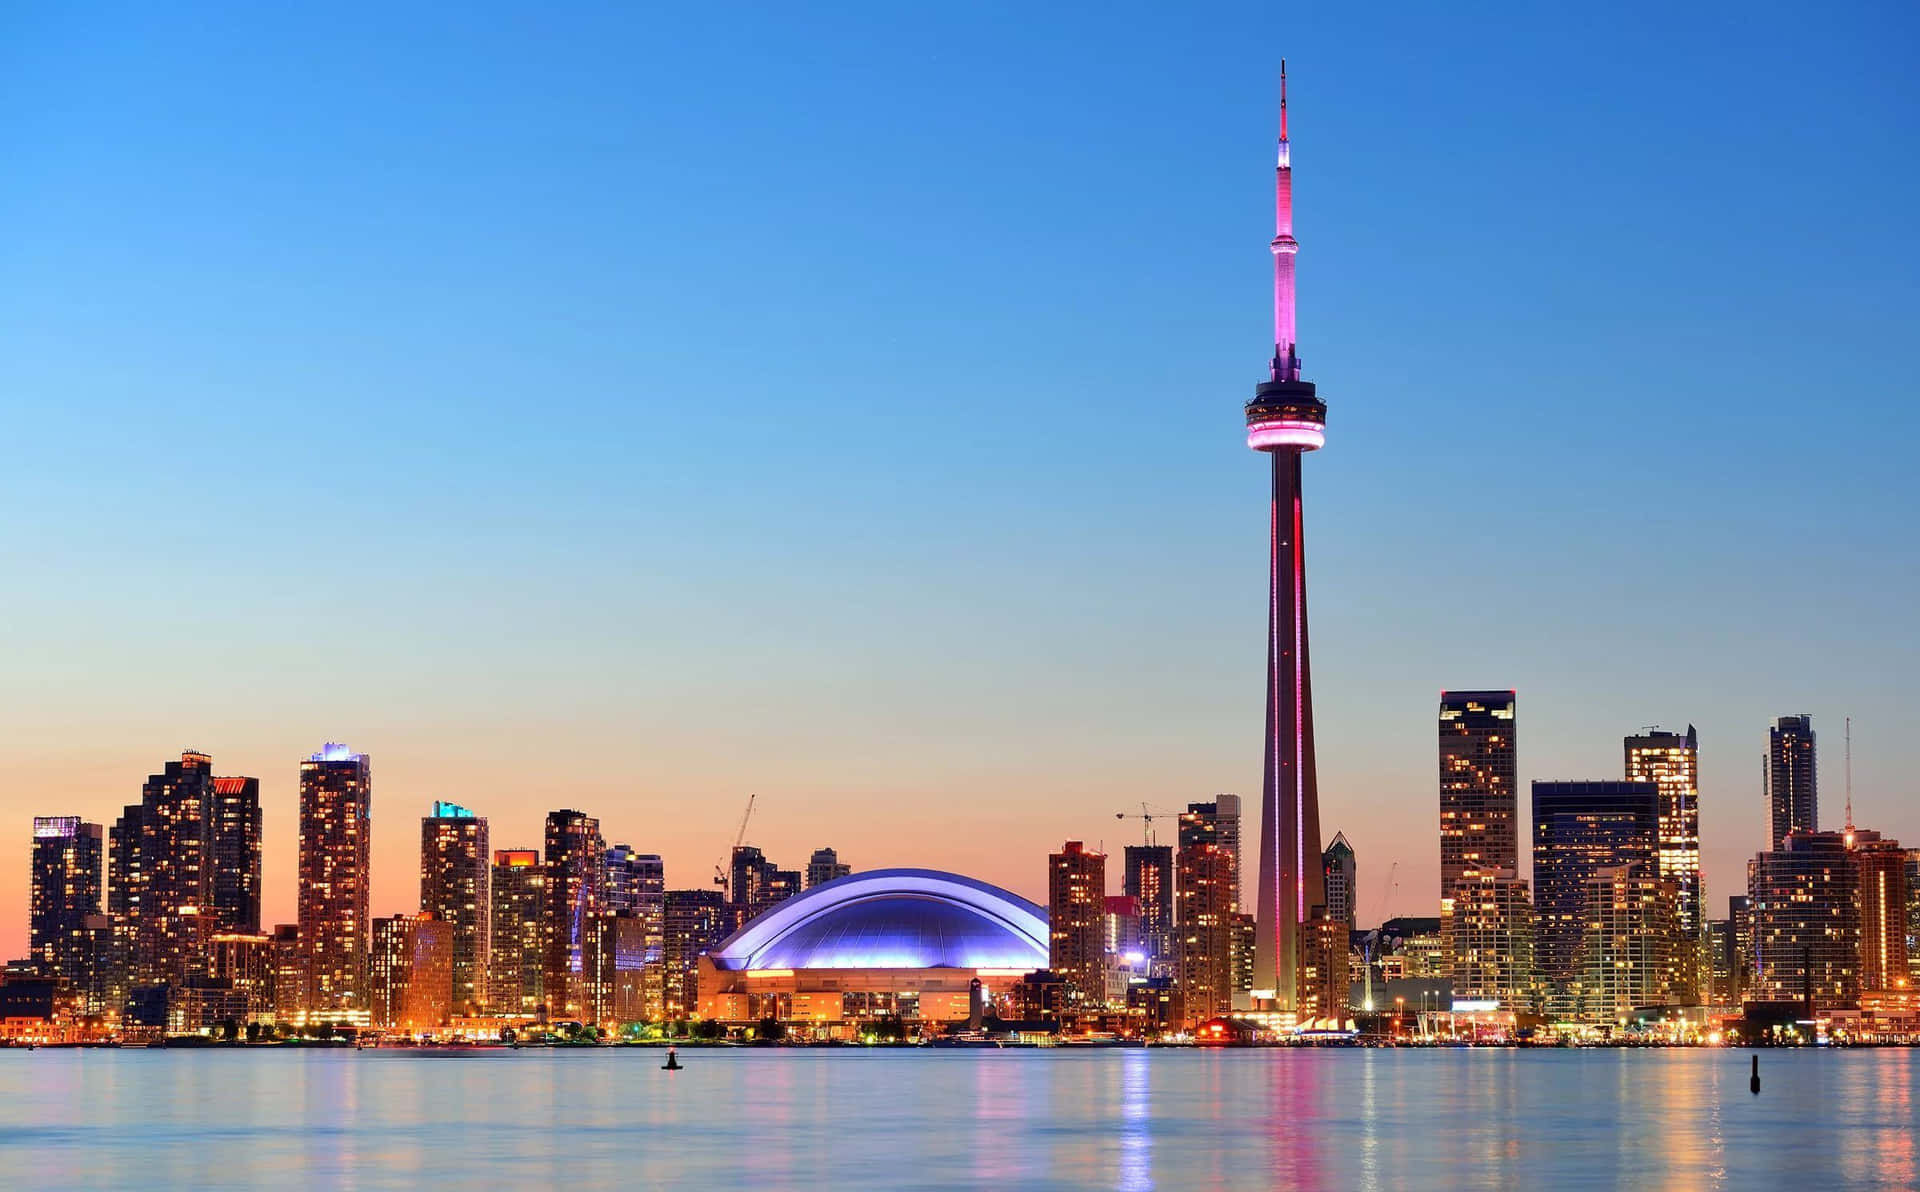 Enjoy a night out in Toronto, Canada